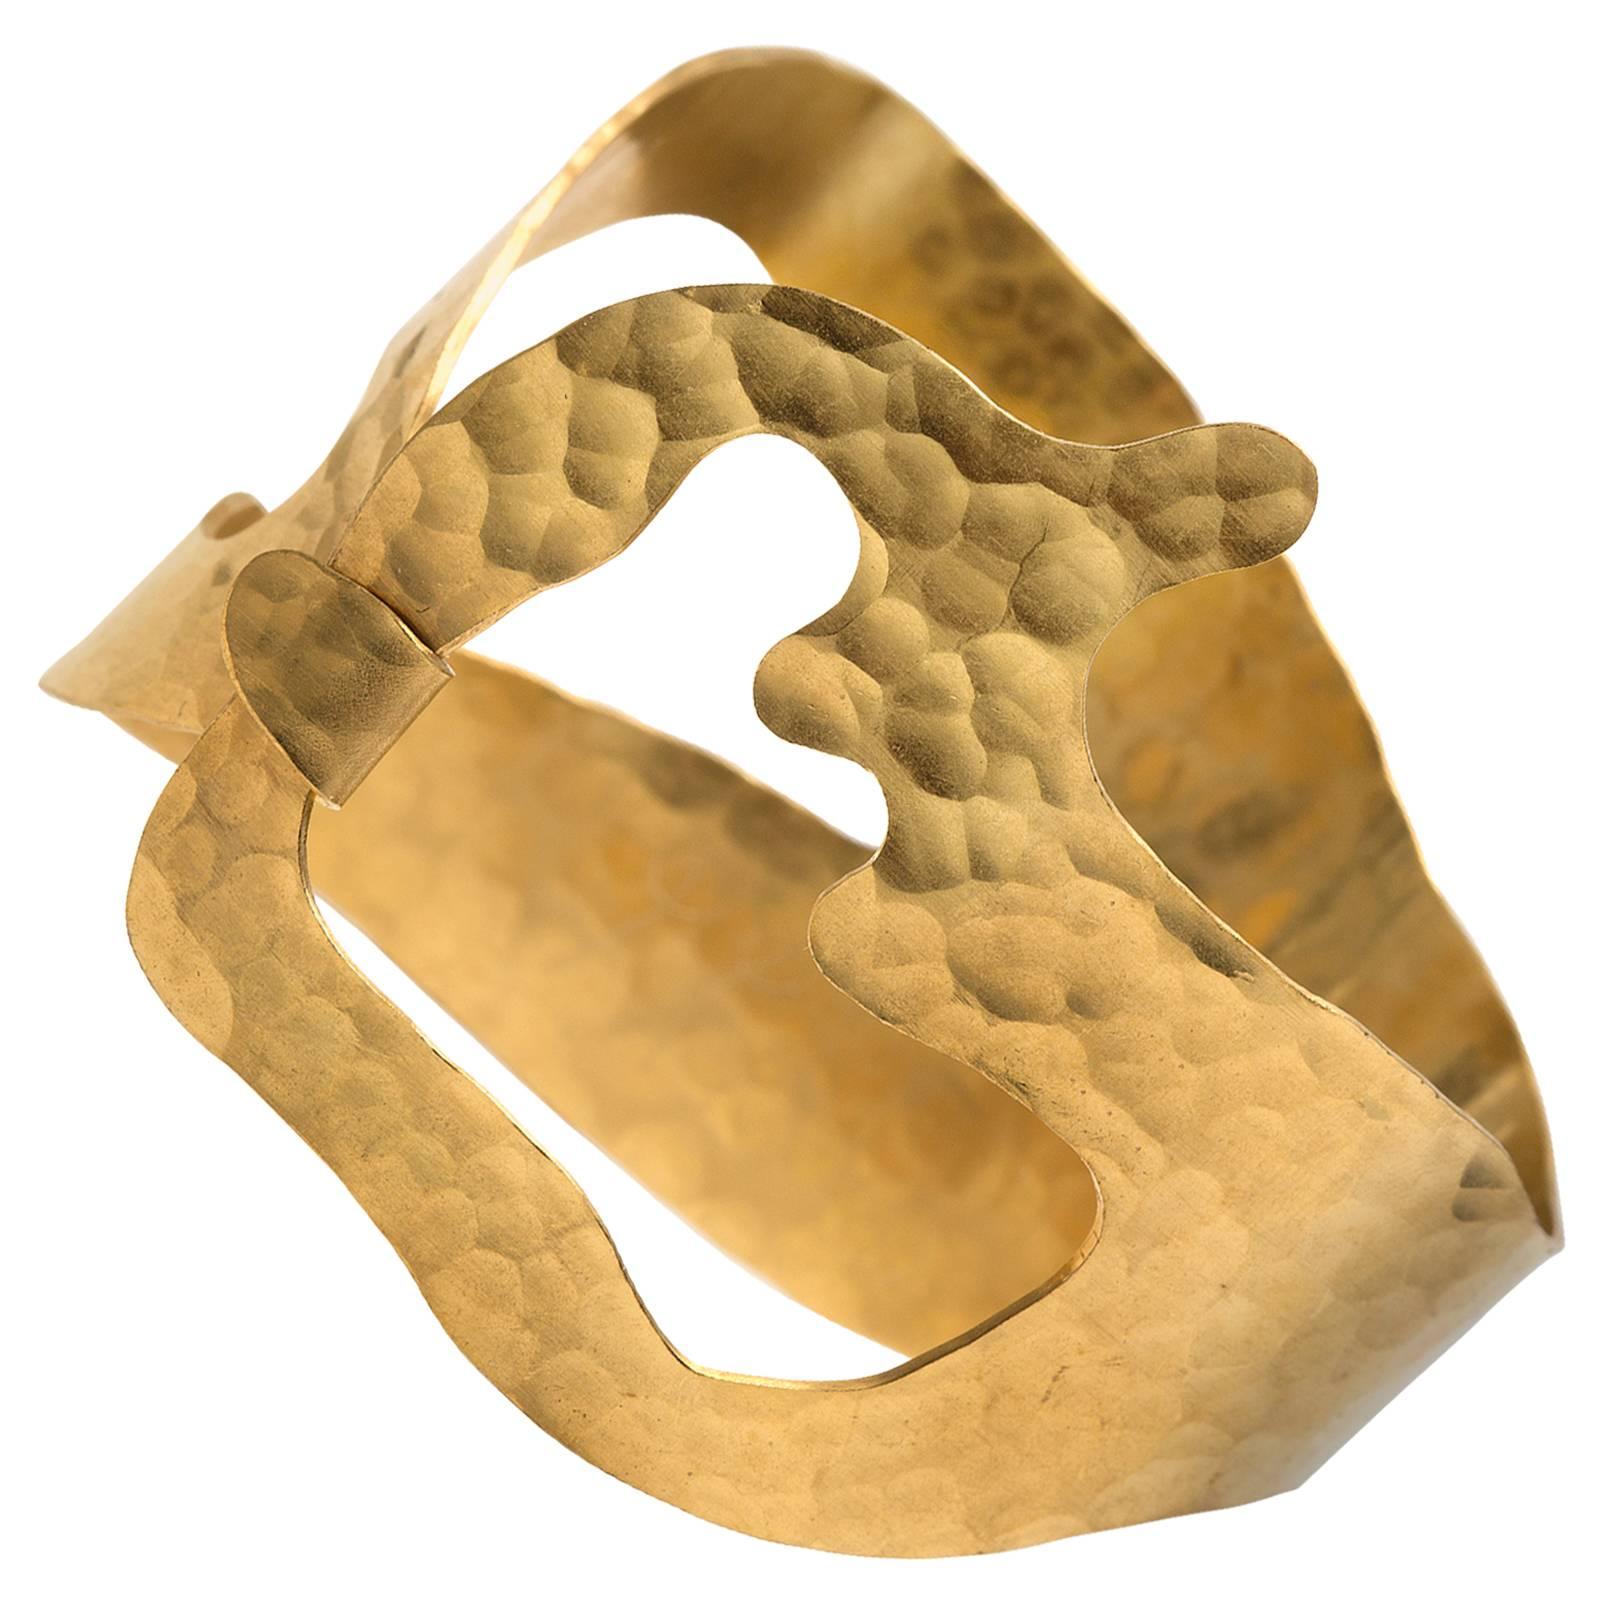 Bracelet "Rhea" Gold-Plated Hand-Hammered by Jacques Jarrige